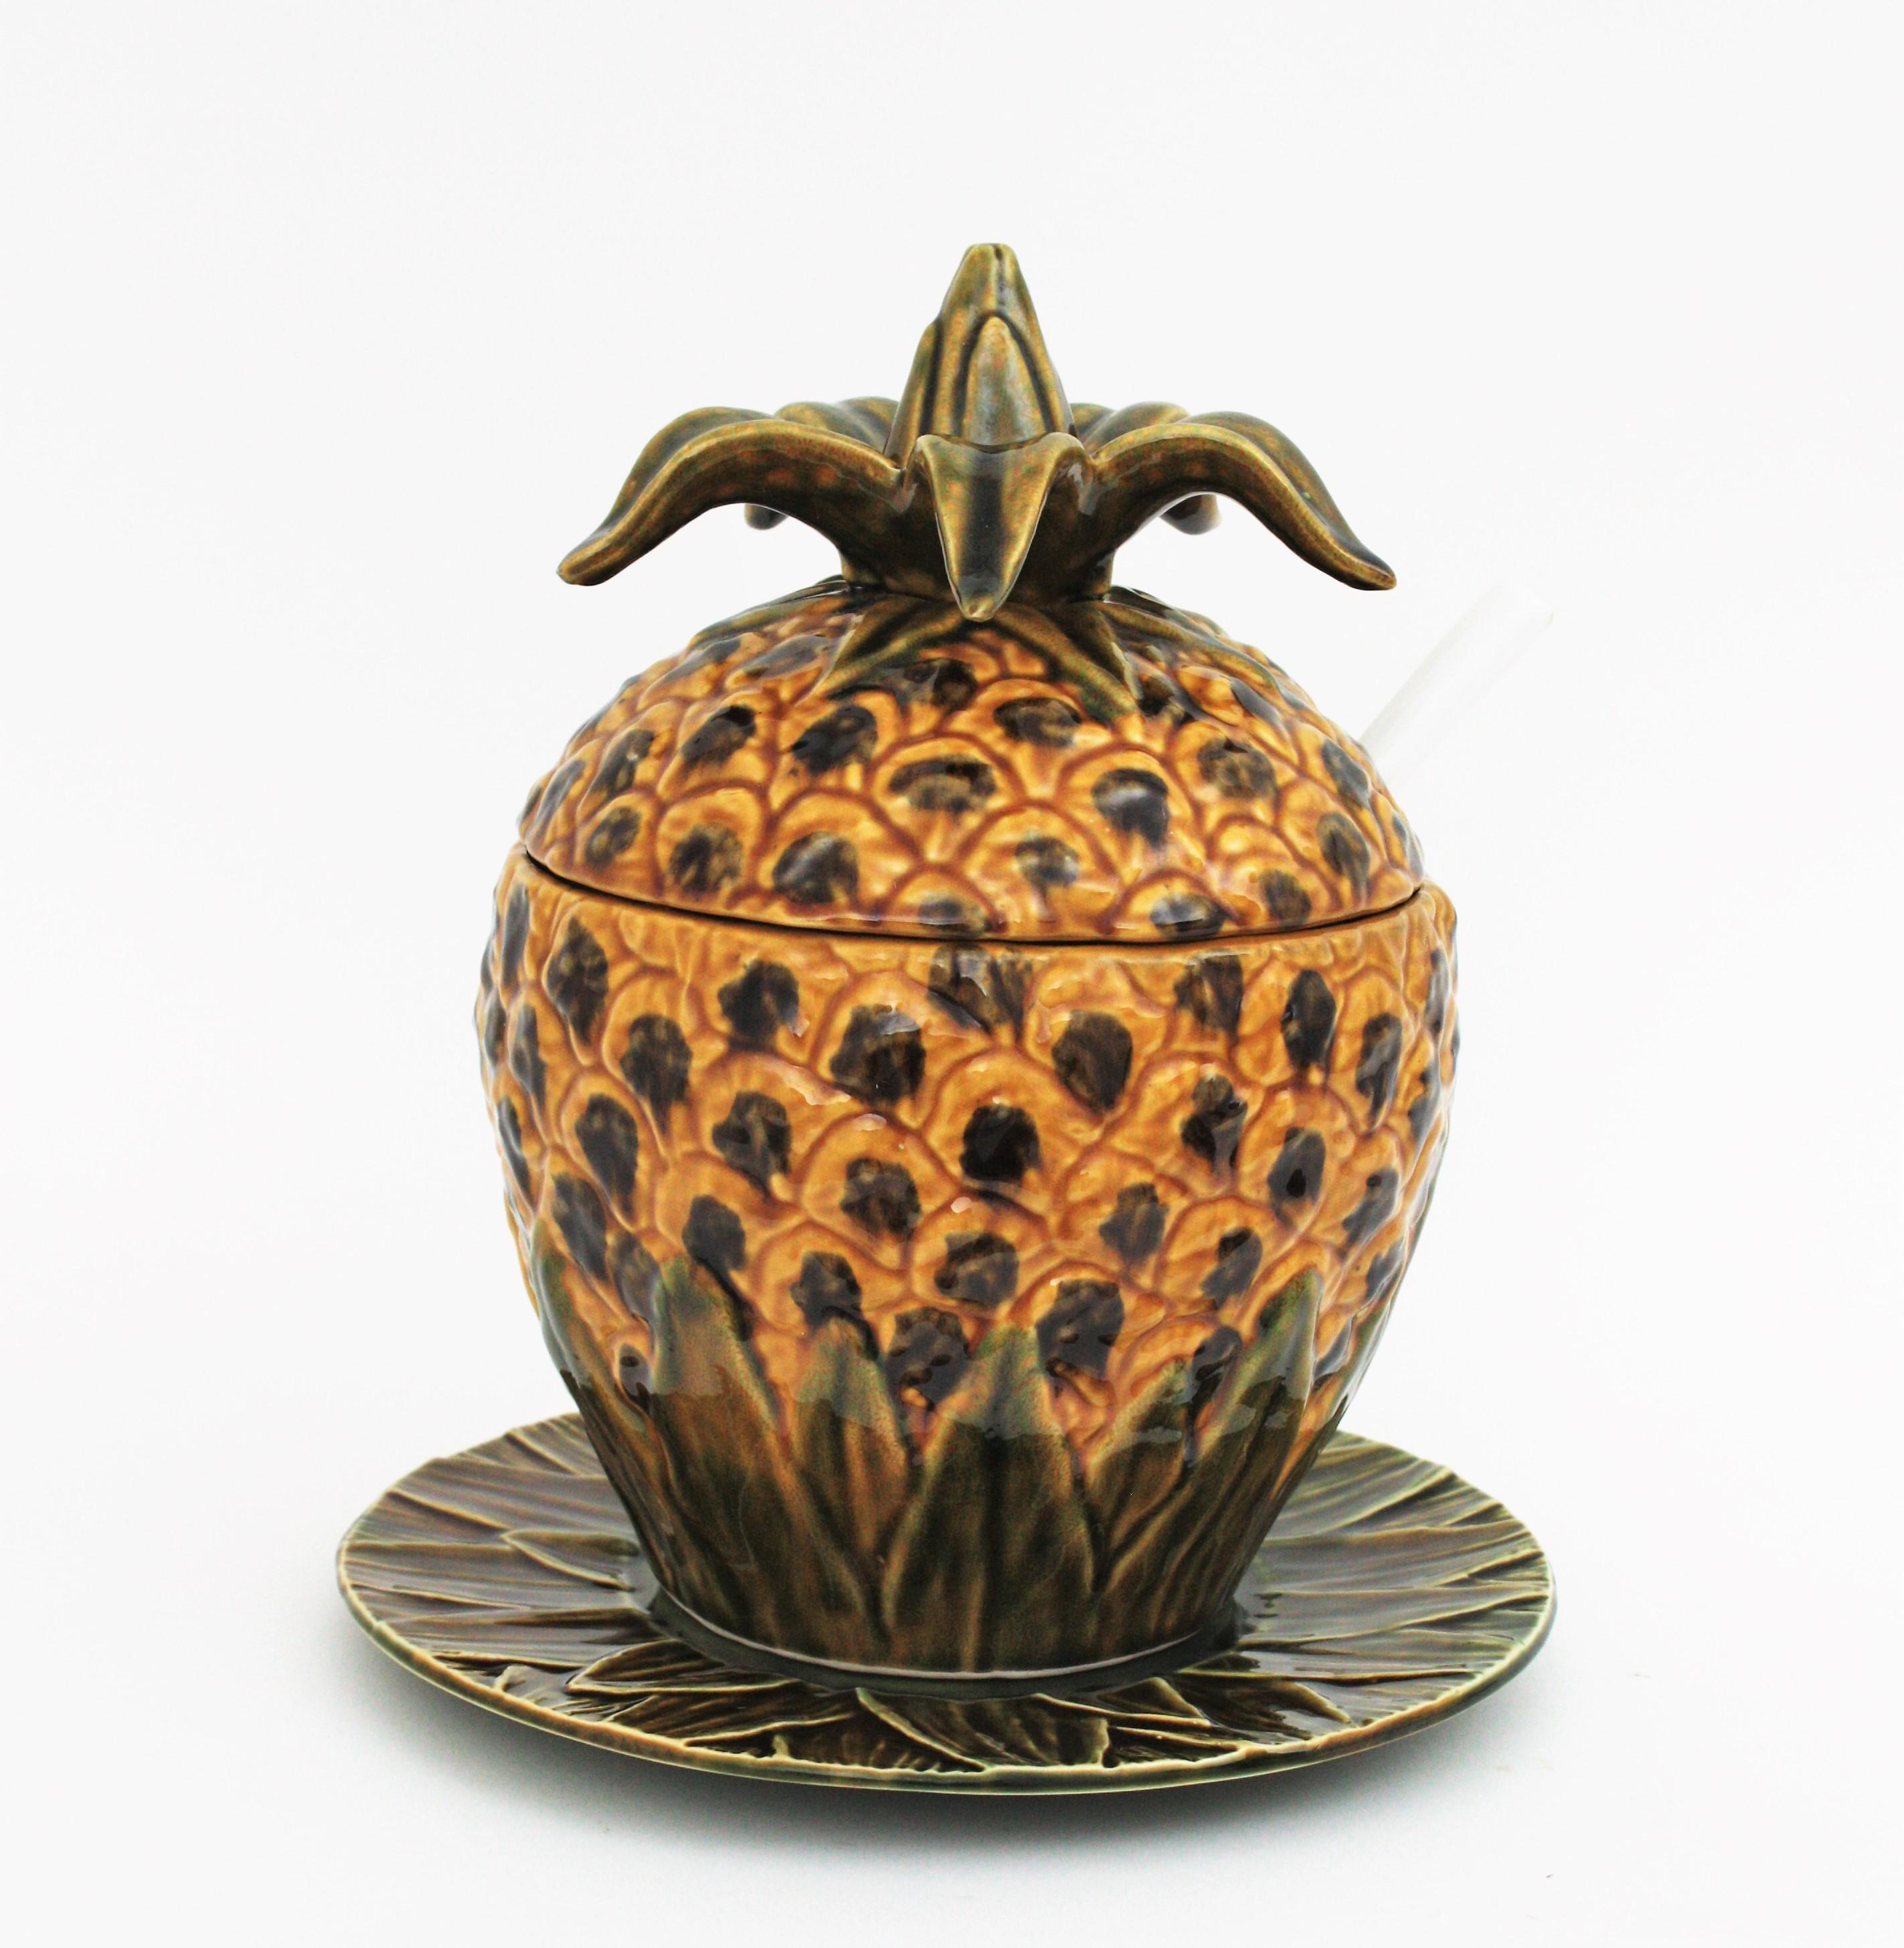 Pineapple Tureen centerpiece with plate and ladle; Majolica, Glazed Ceramic. Portugal, 1960s
This huge tureen has a very realistic pineapple design. A serving plate with leaves design and a ladle complete the set. 
This highly decorative serving